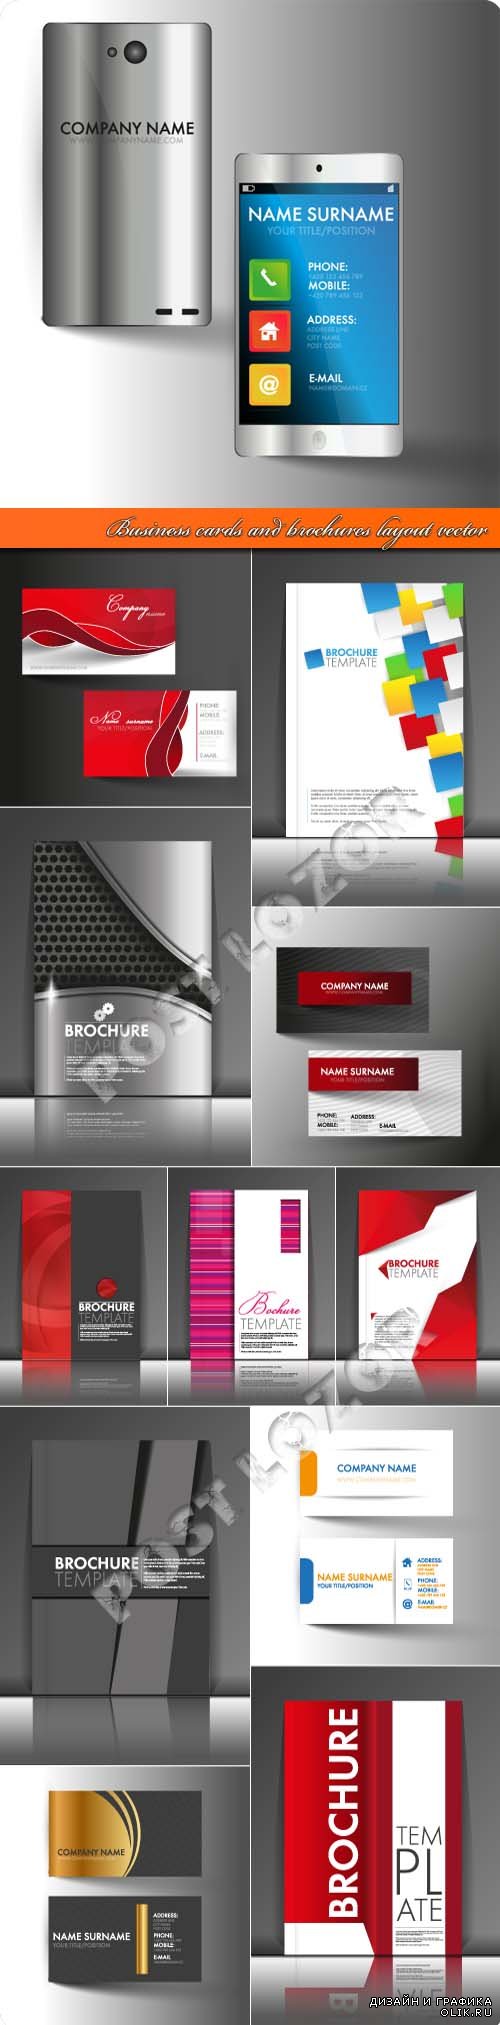 Business cards and brochures layout vector